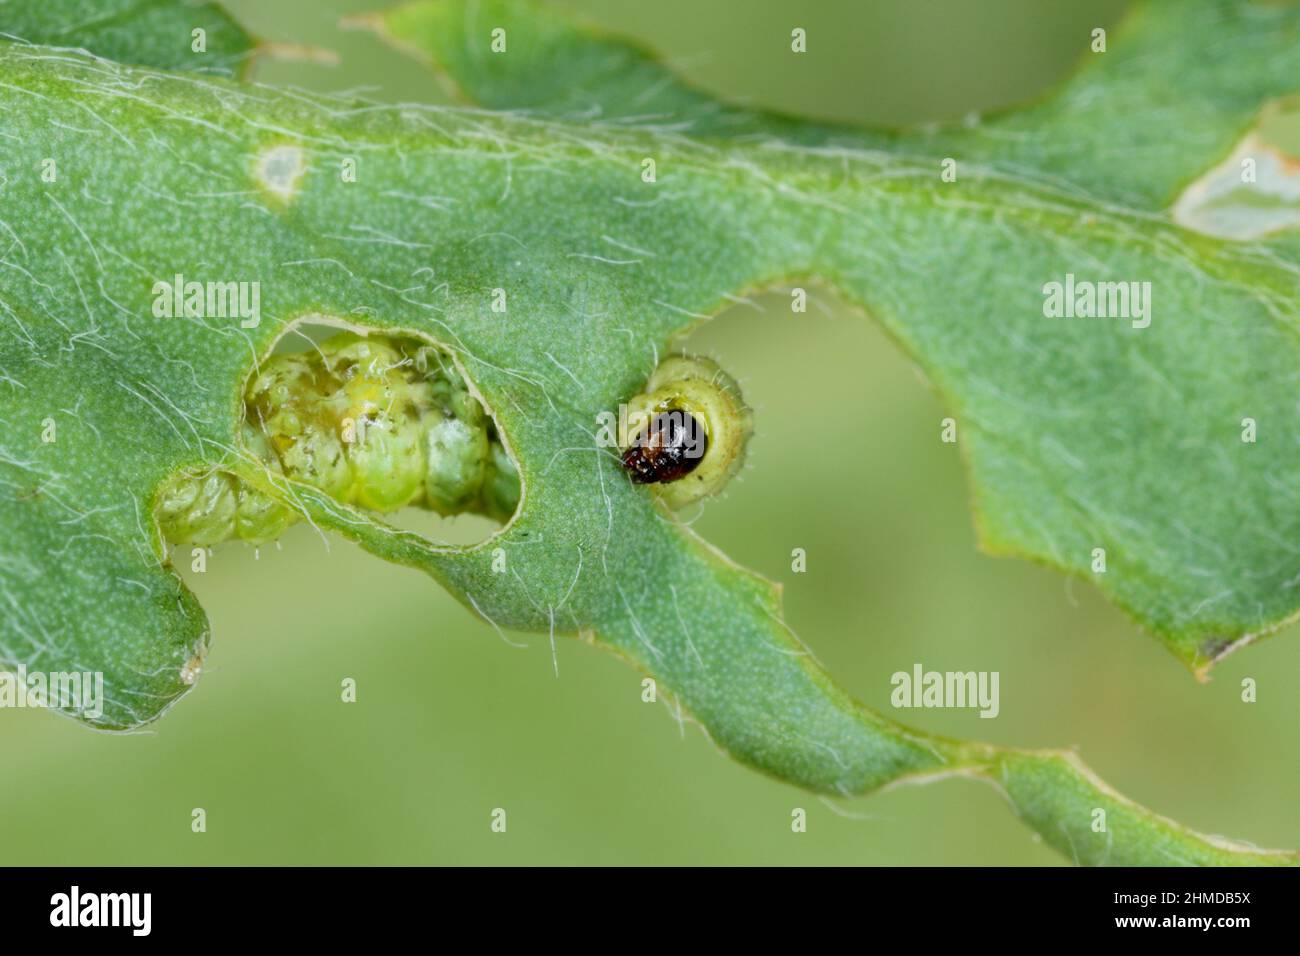 Larva of Lucerne weevil - Hypera postica on a damaged alfalfa plant. It is a dangerous pest of this crop plant. Stock Photo